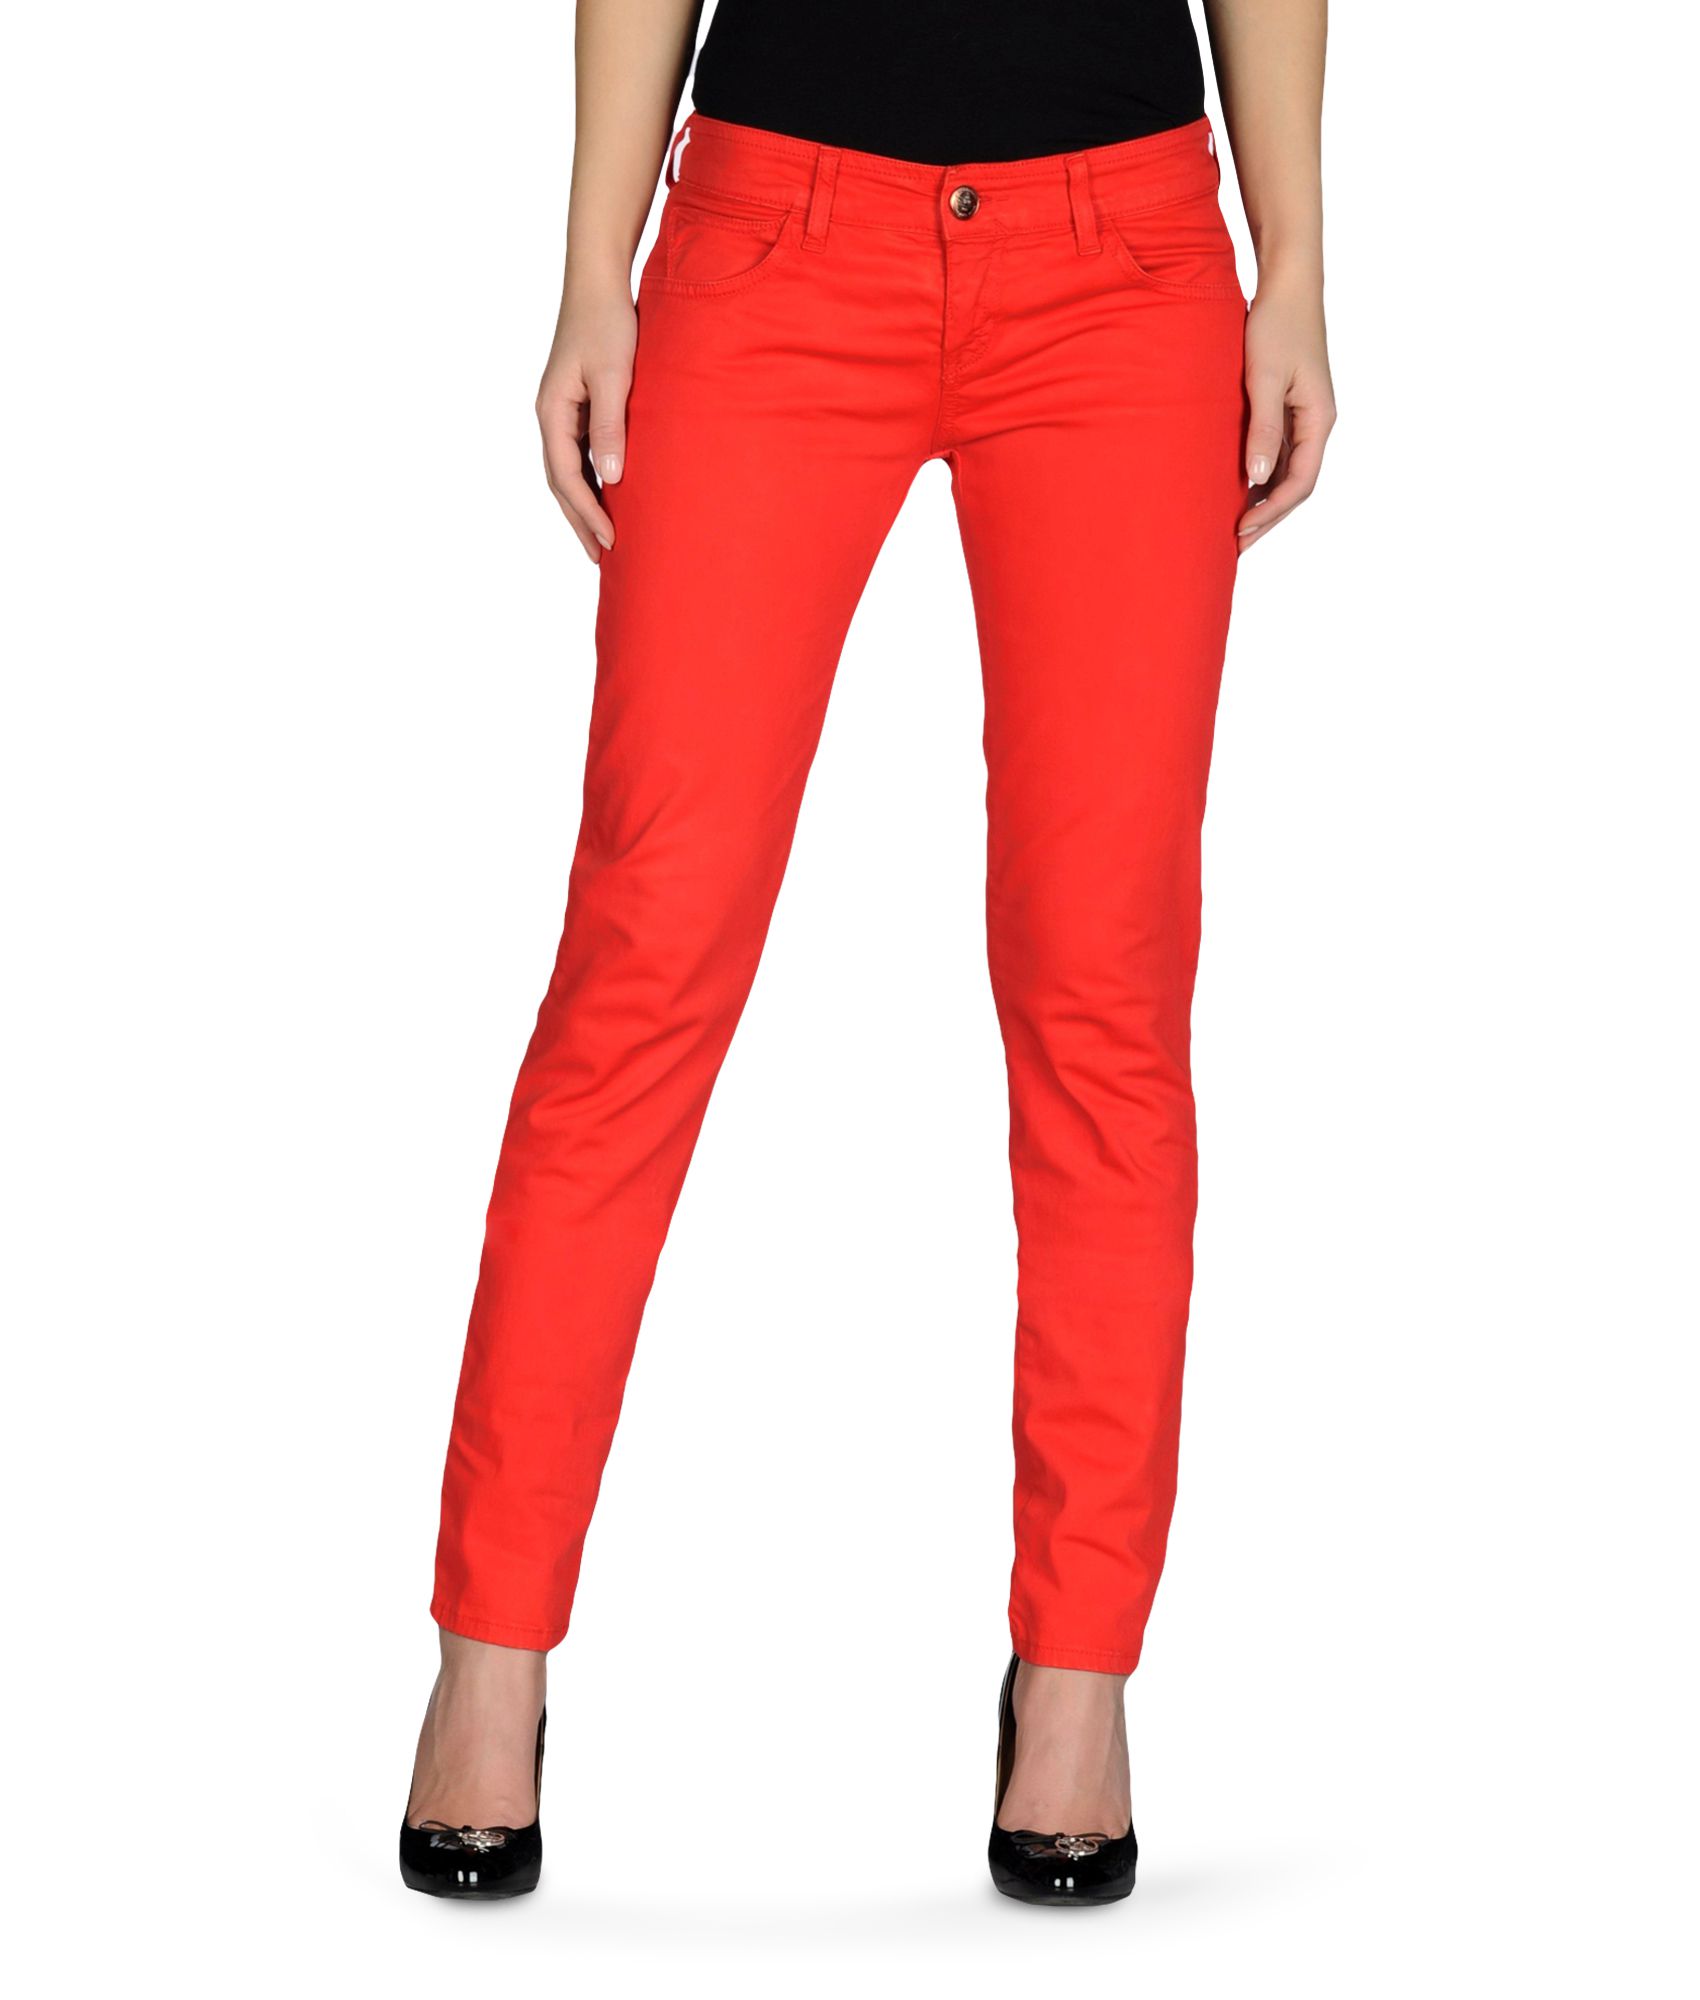 armani red jeans